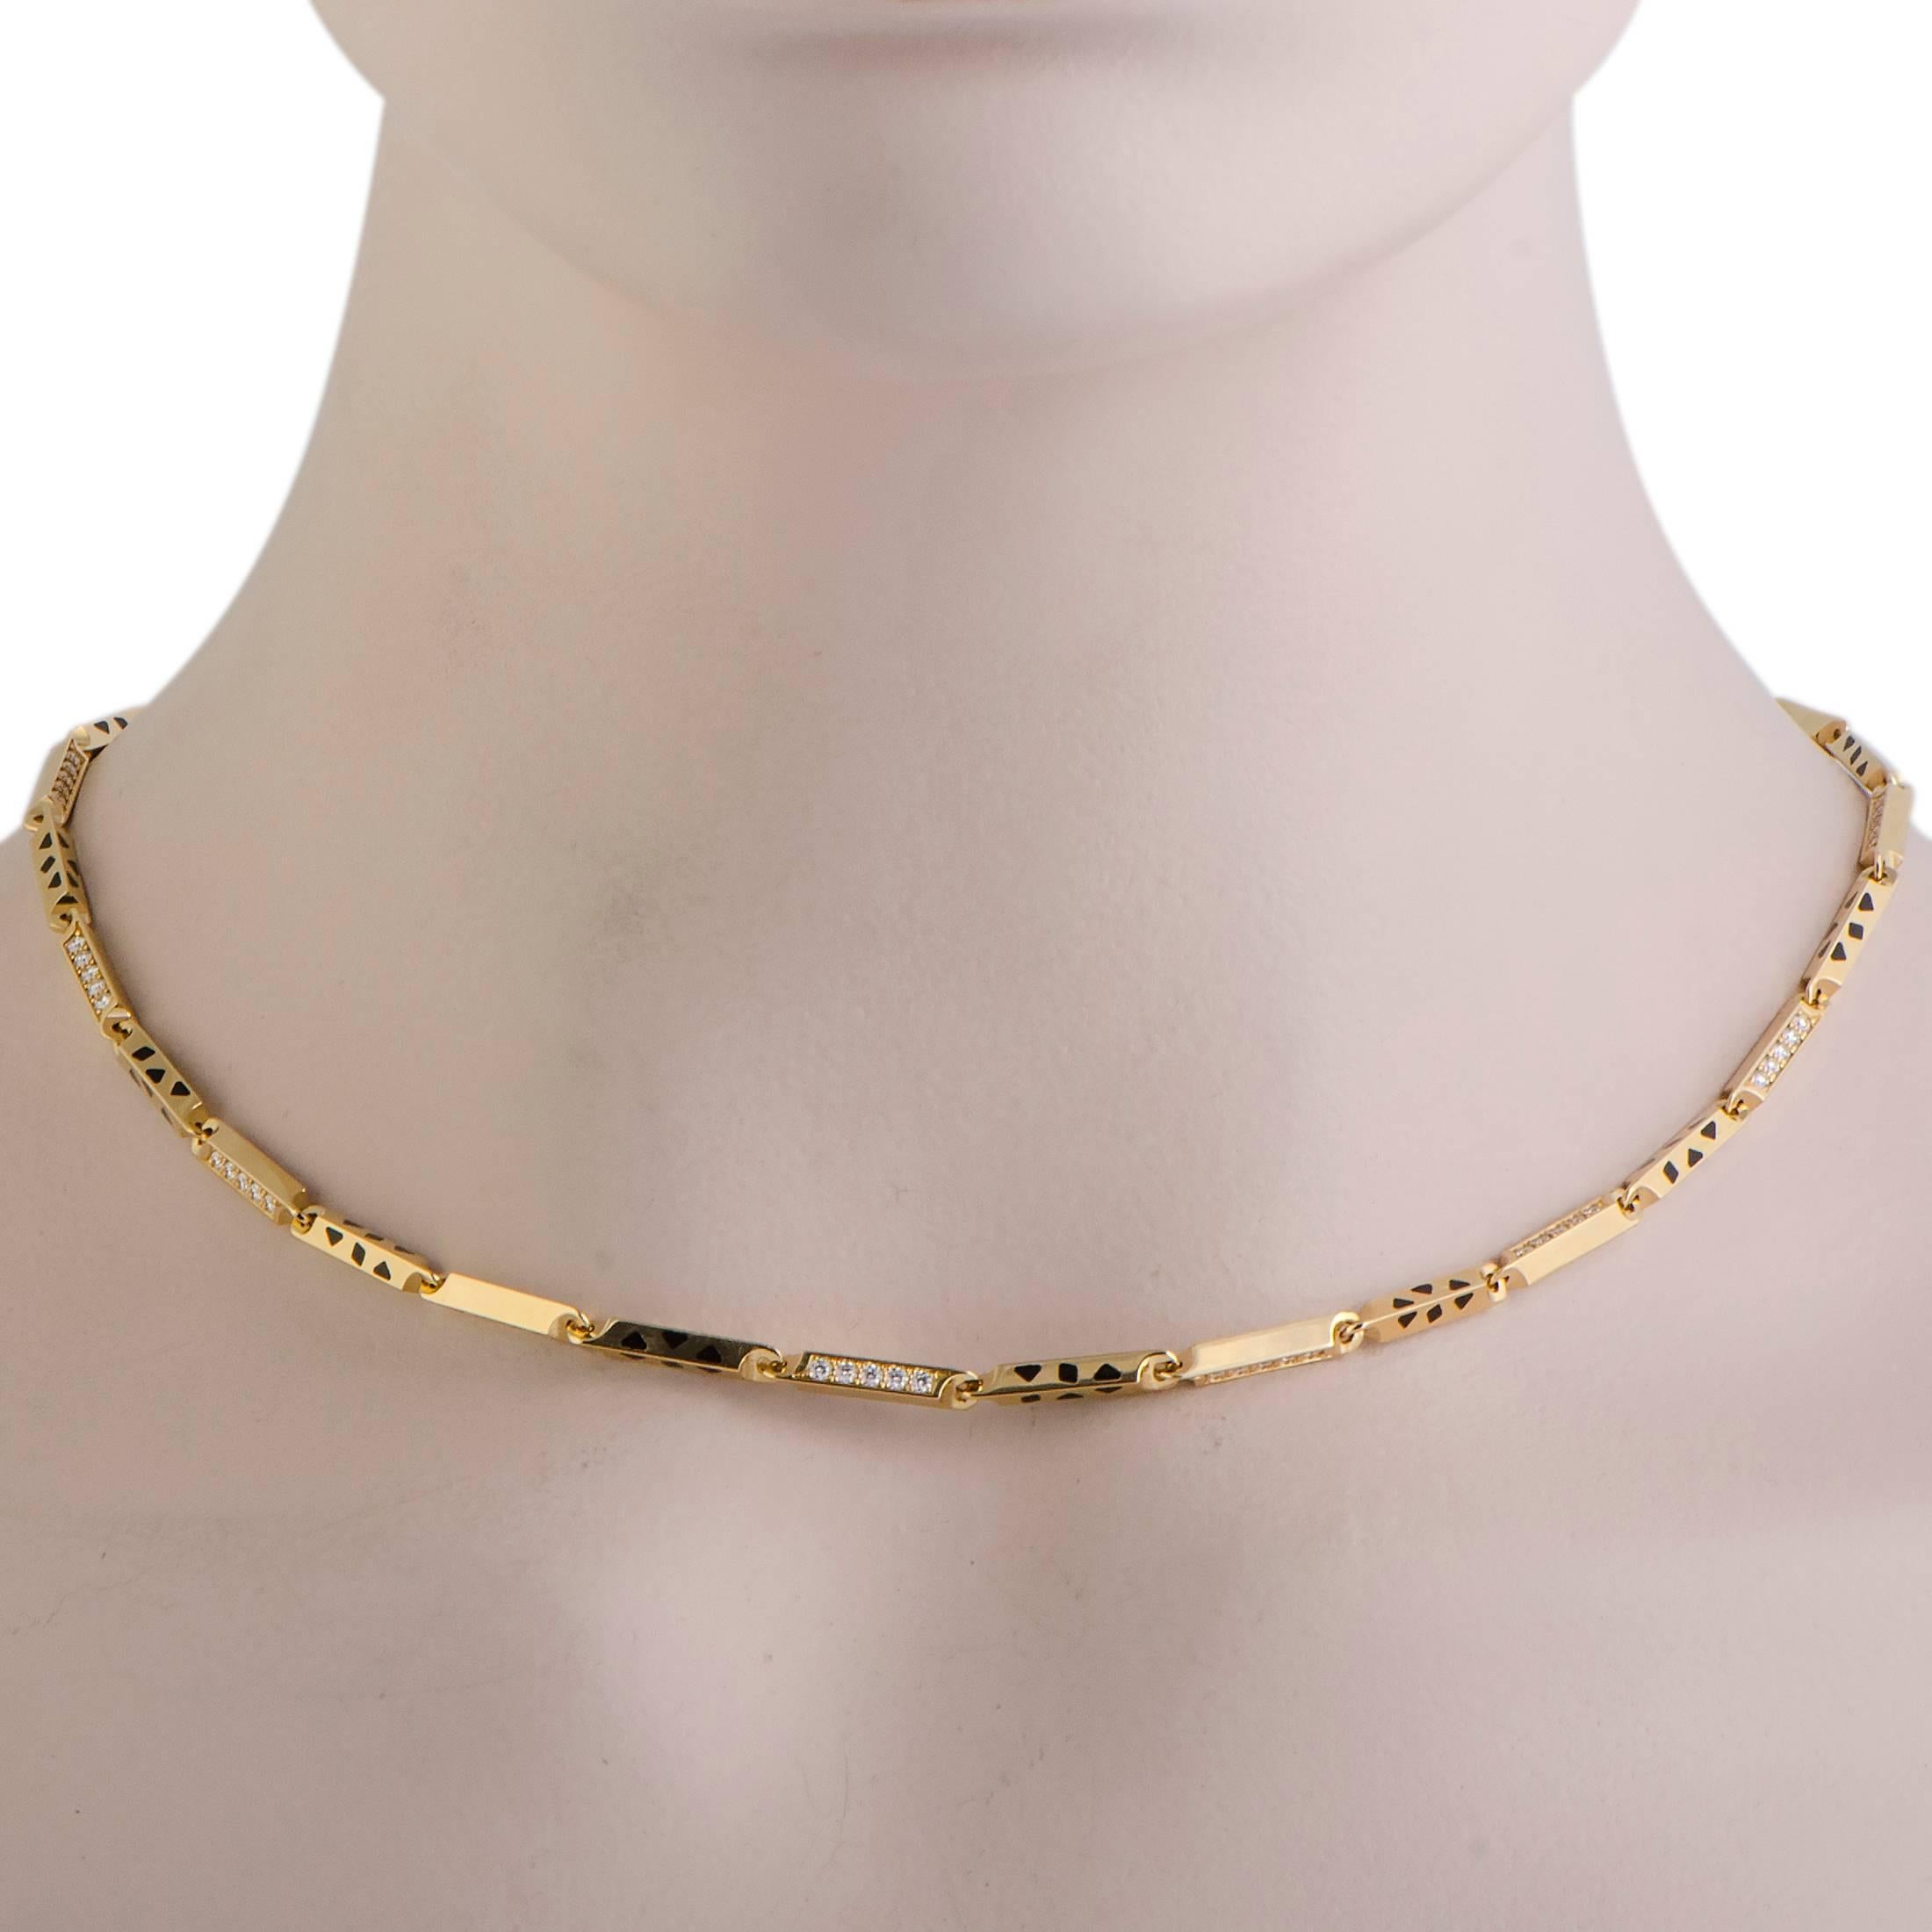 Presented within the iconic “Panthère” collection by Cartier, this sublime necklace offers a stunningly prestigious appearance. Exquisitely crafted from 18K yellow gold, the necklace is decorated with lacquer and 1.40 carats of colorless (grade E)